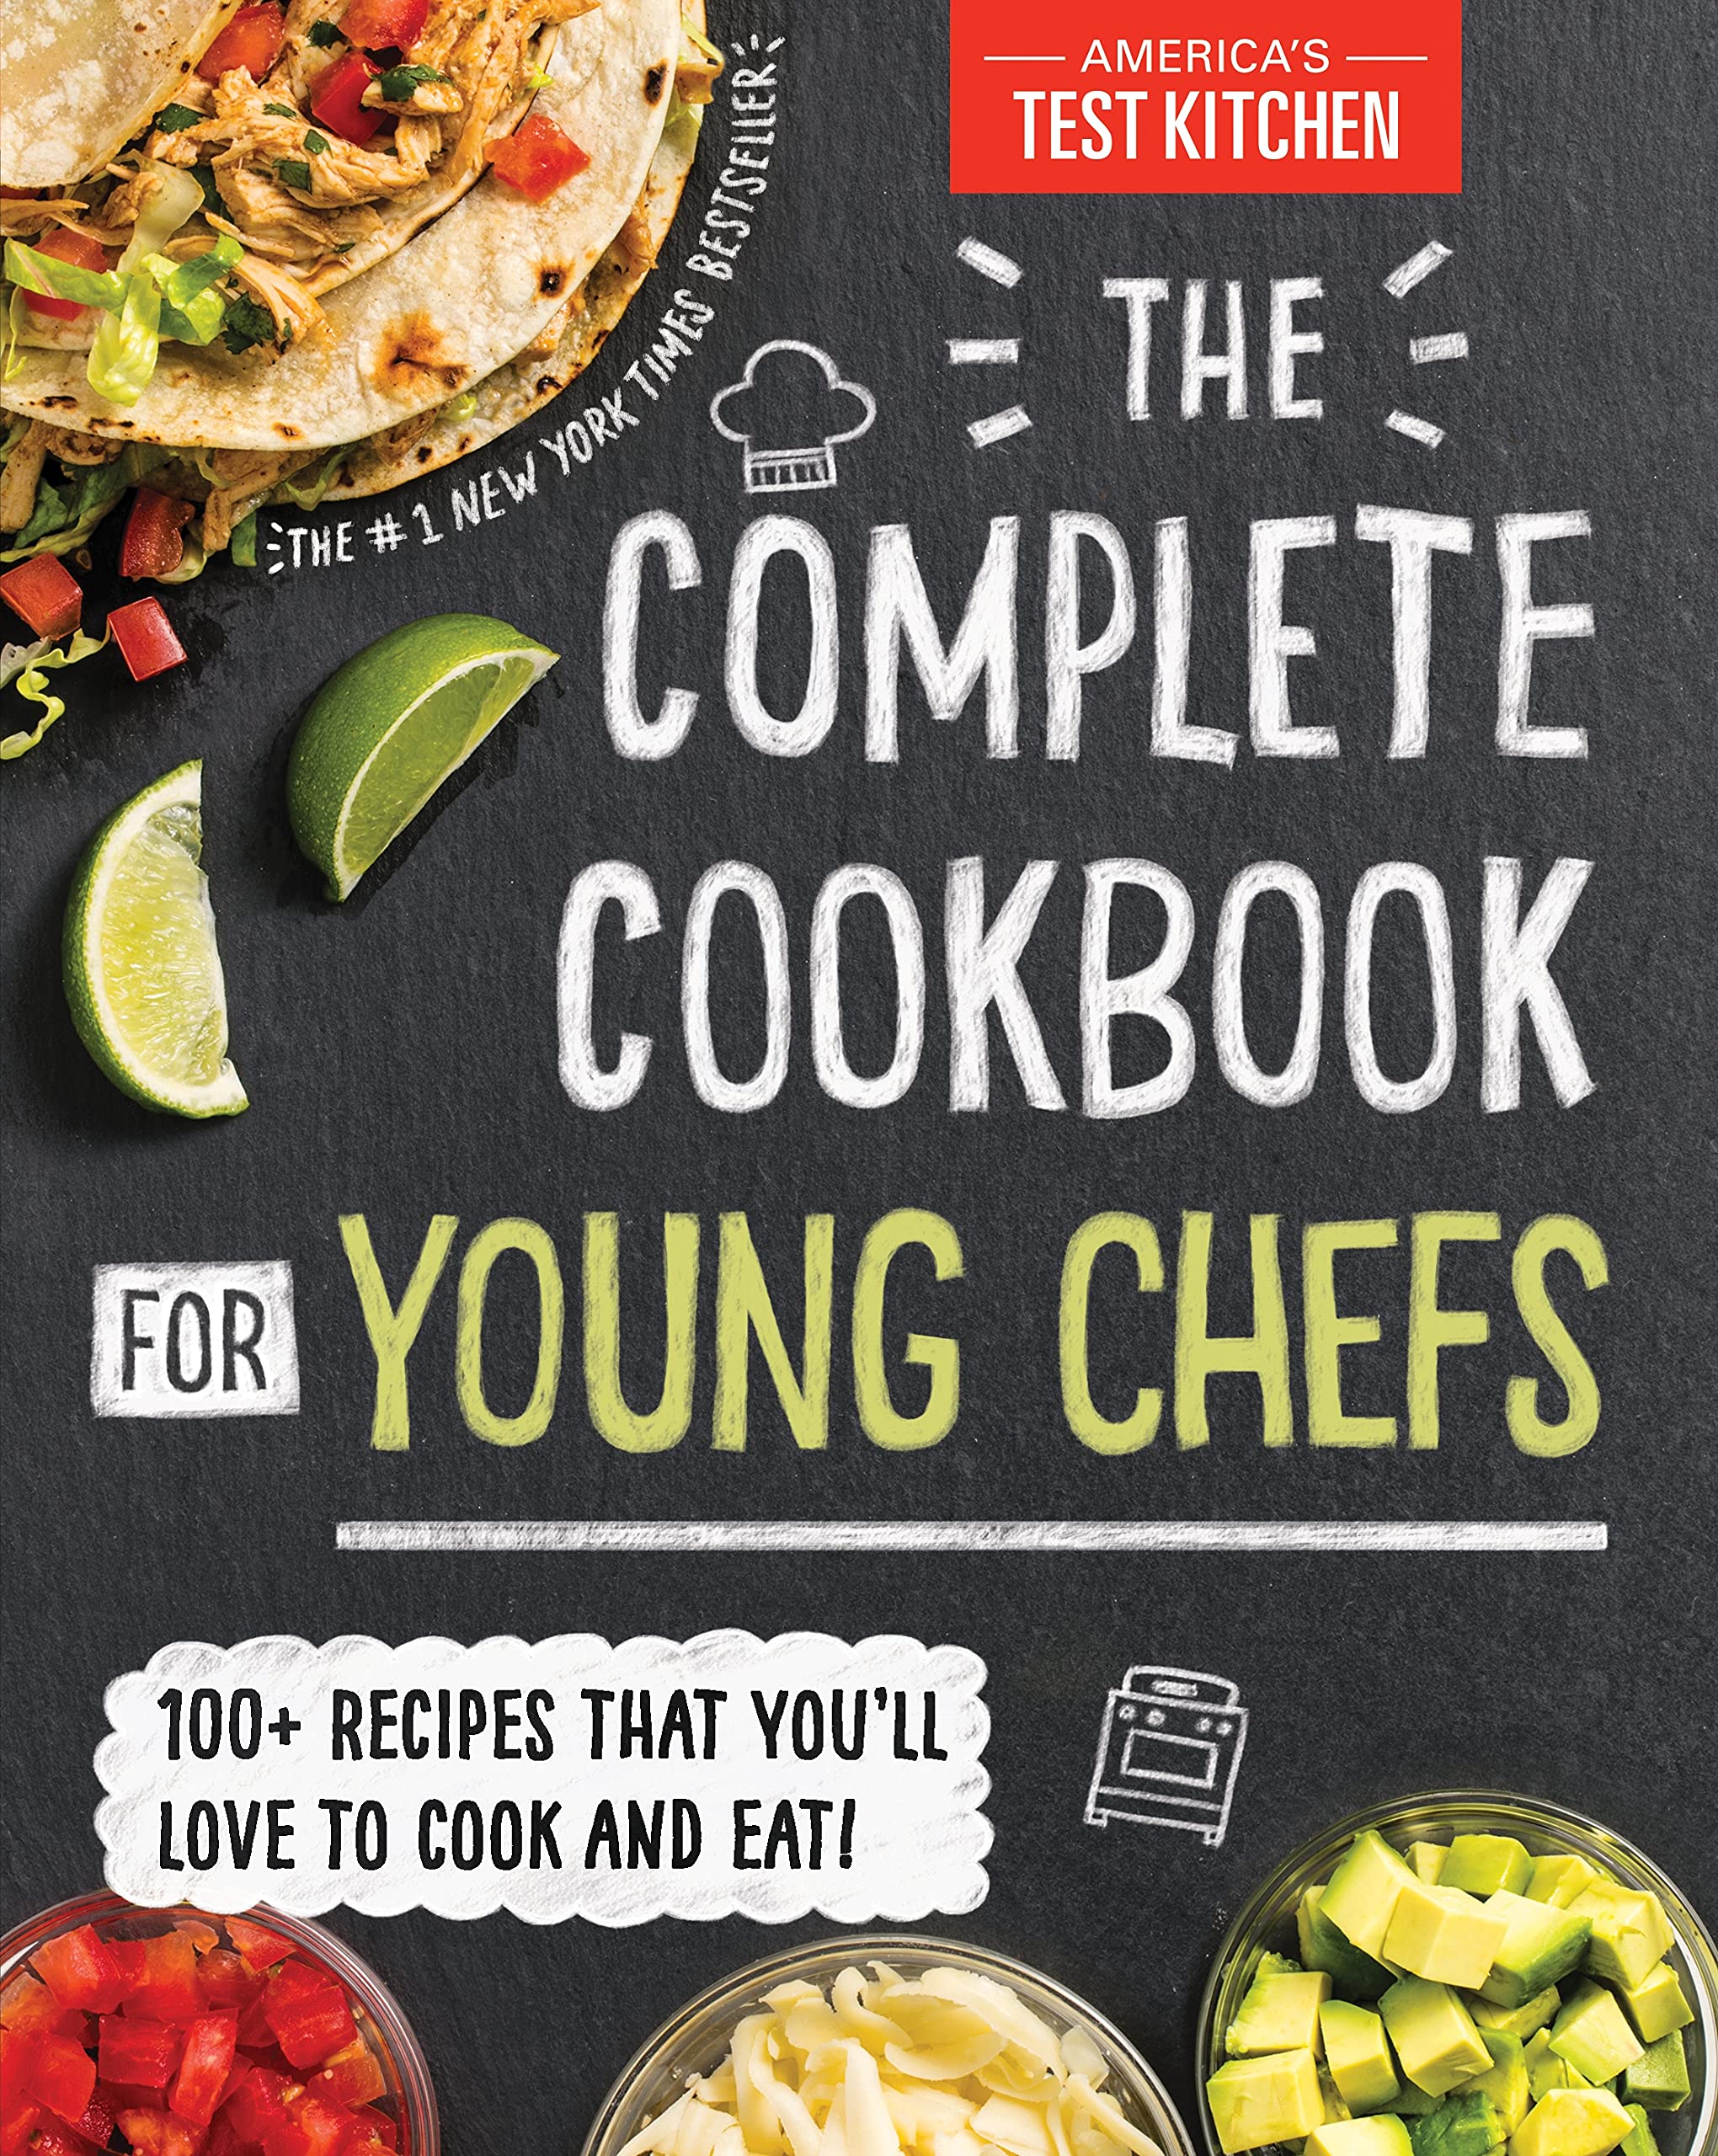 The Complete Cookbook for Young Chefs: 100+ Recipes that You'll Love to Cook and Eat (America's Test Kitchen Kids)